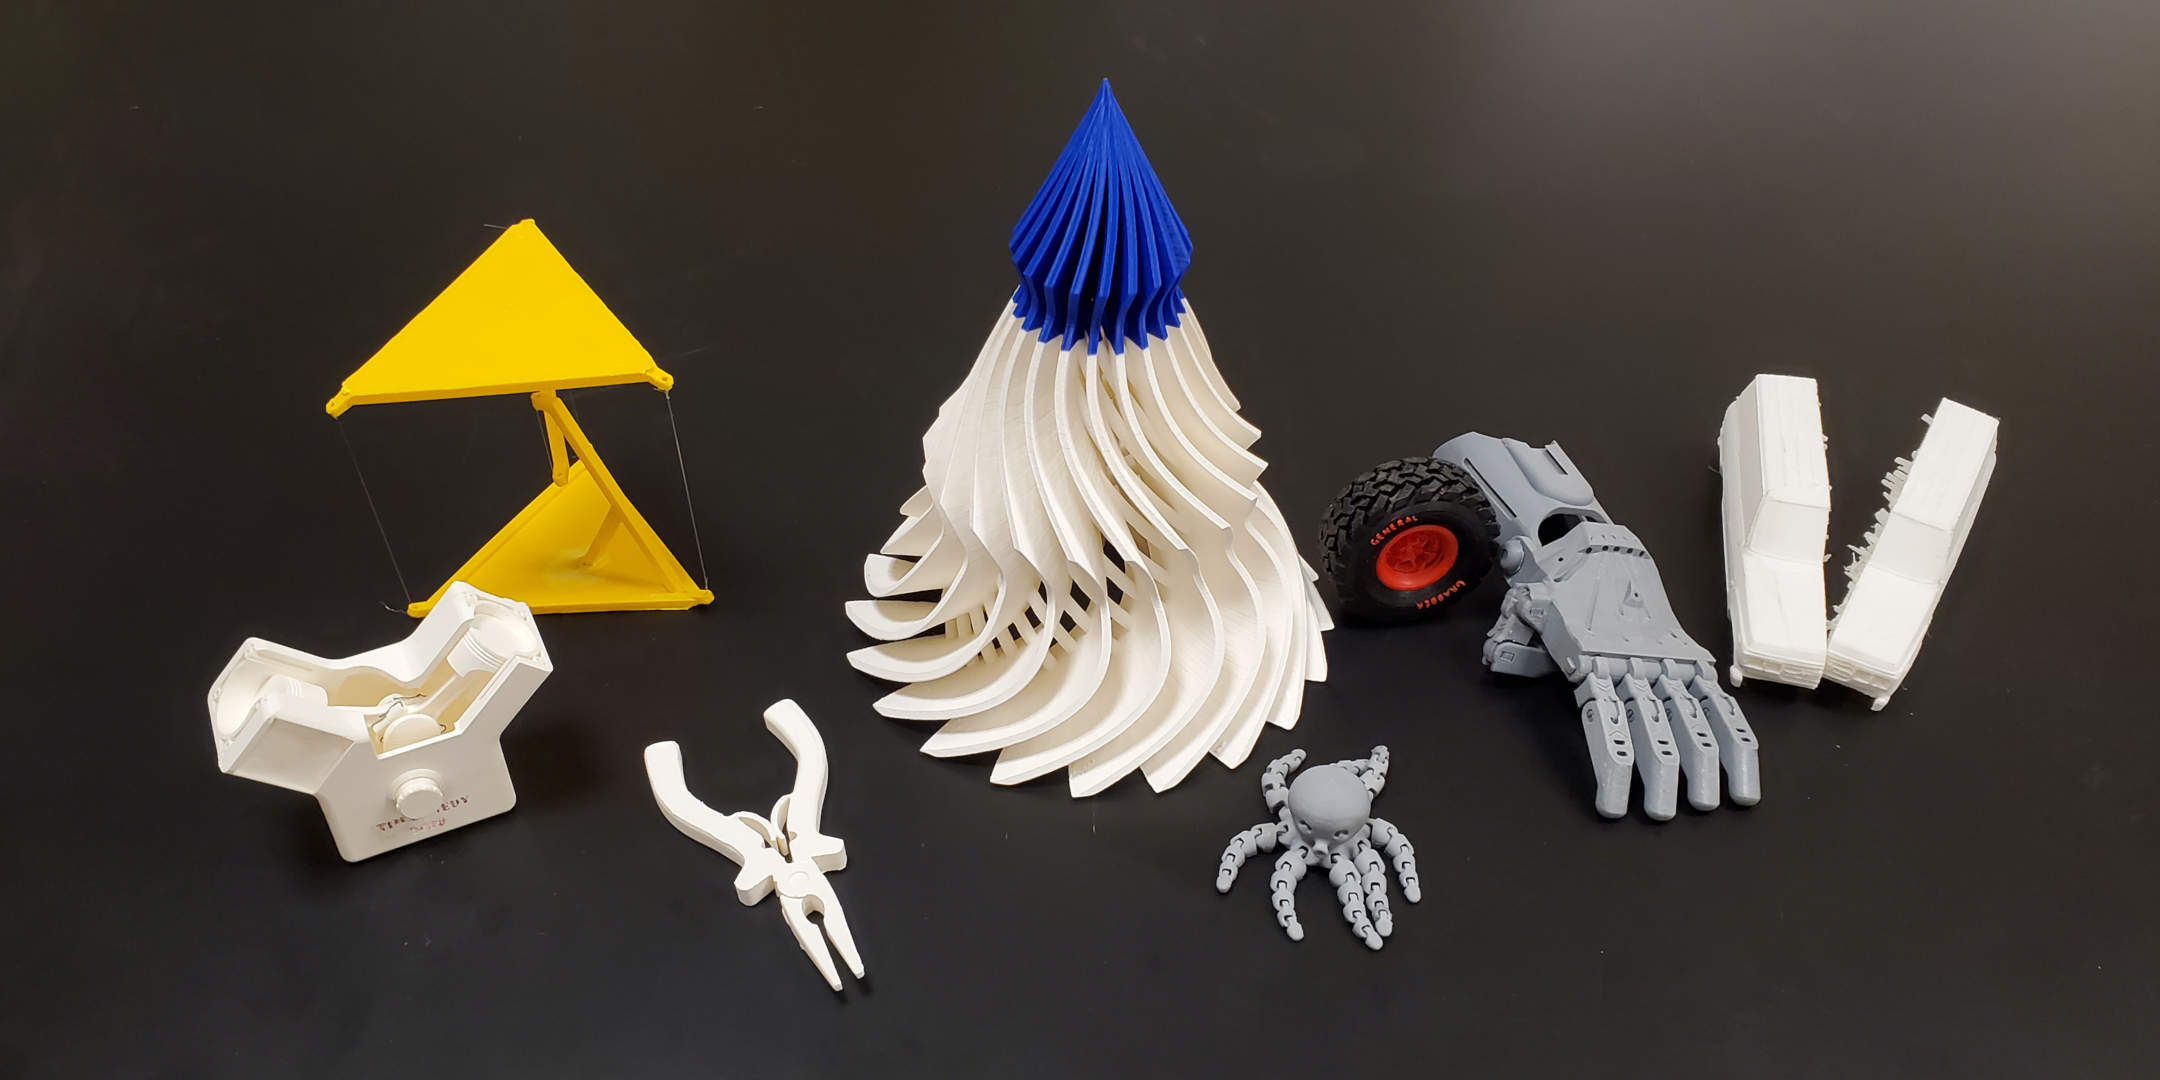 3D printed parts from the ODU makerspace